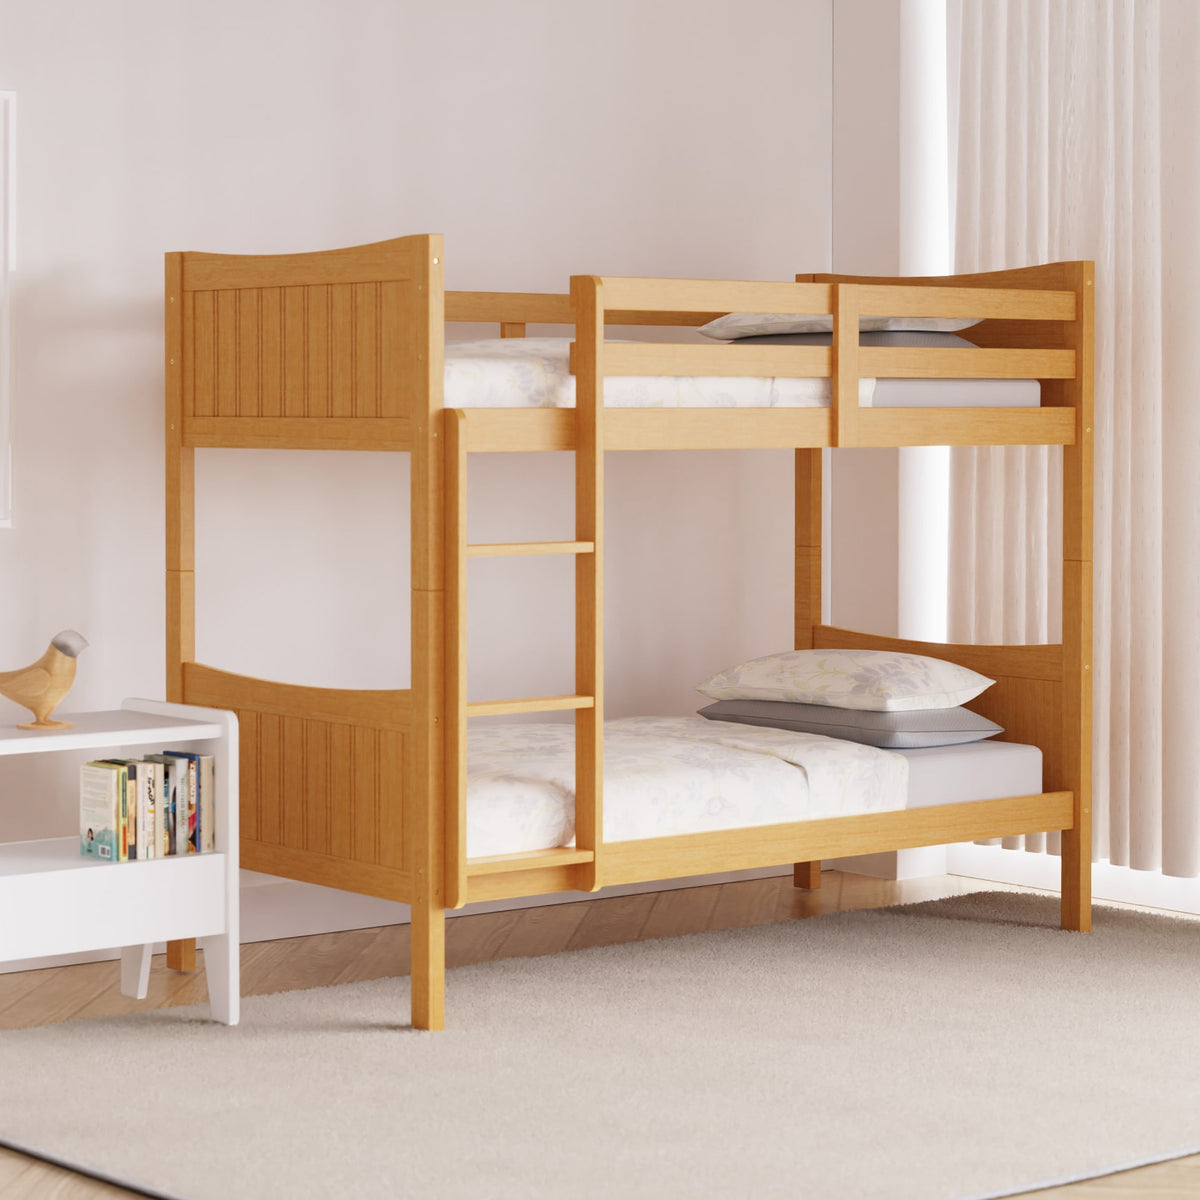 Finchley Wooden Bunk Bed for bedroom